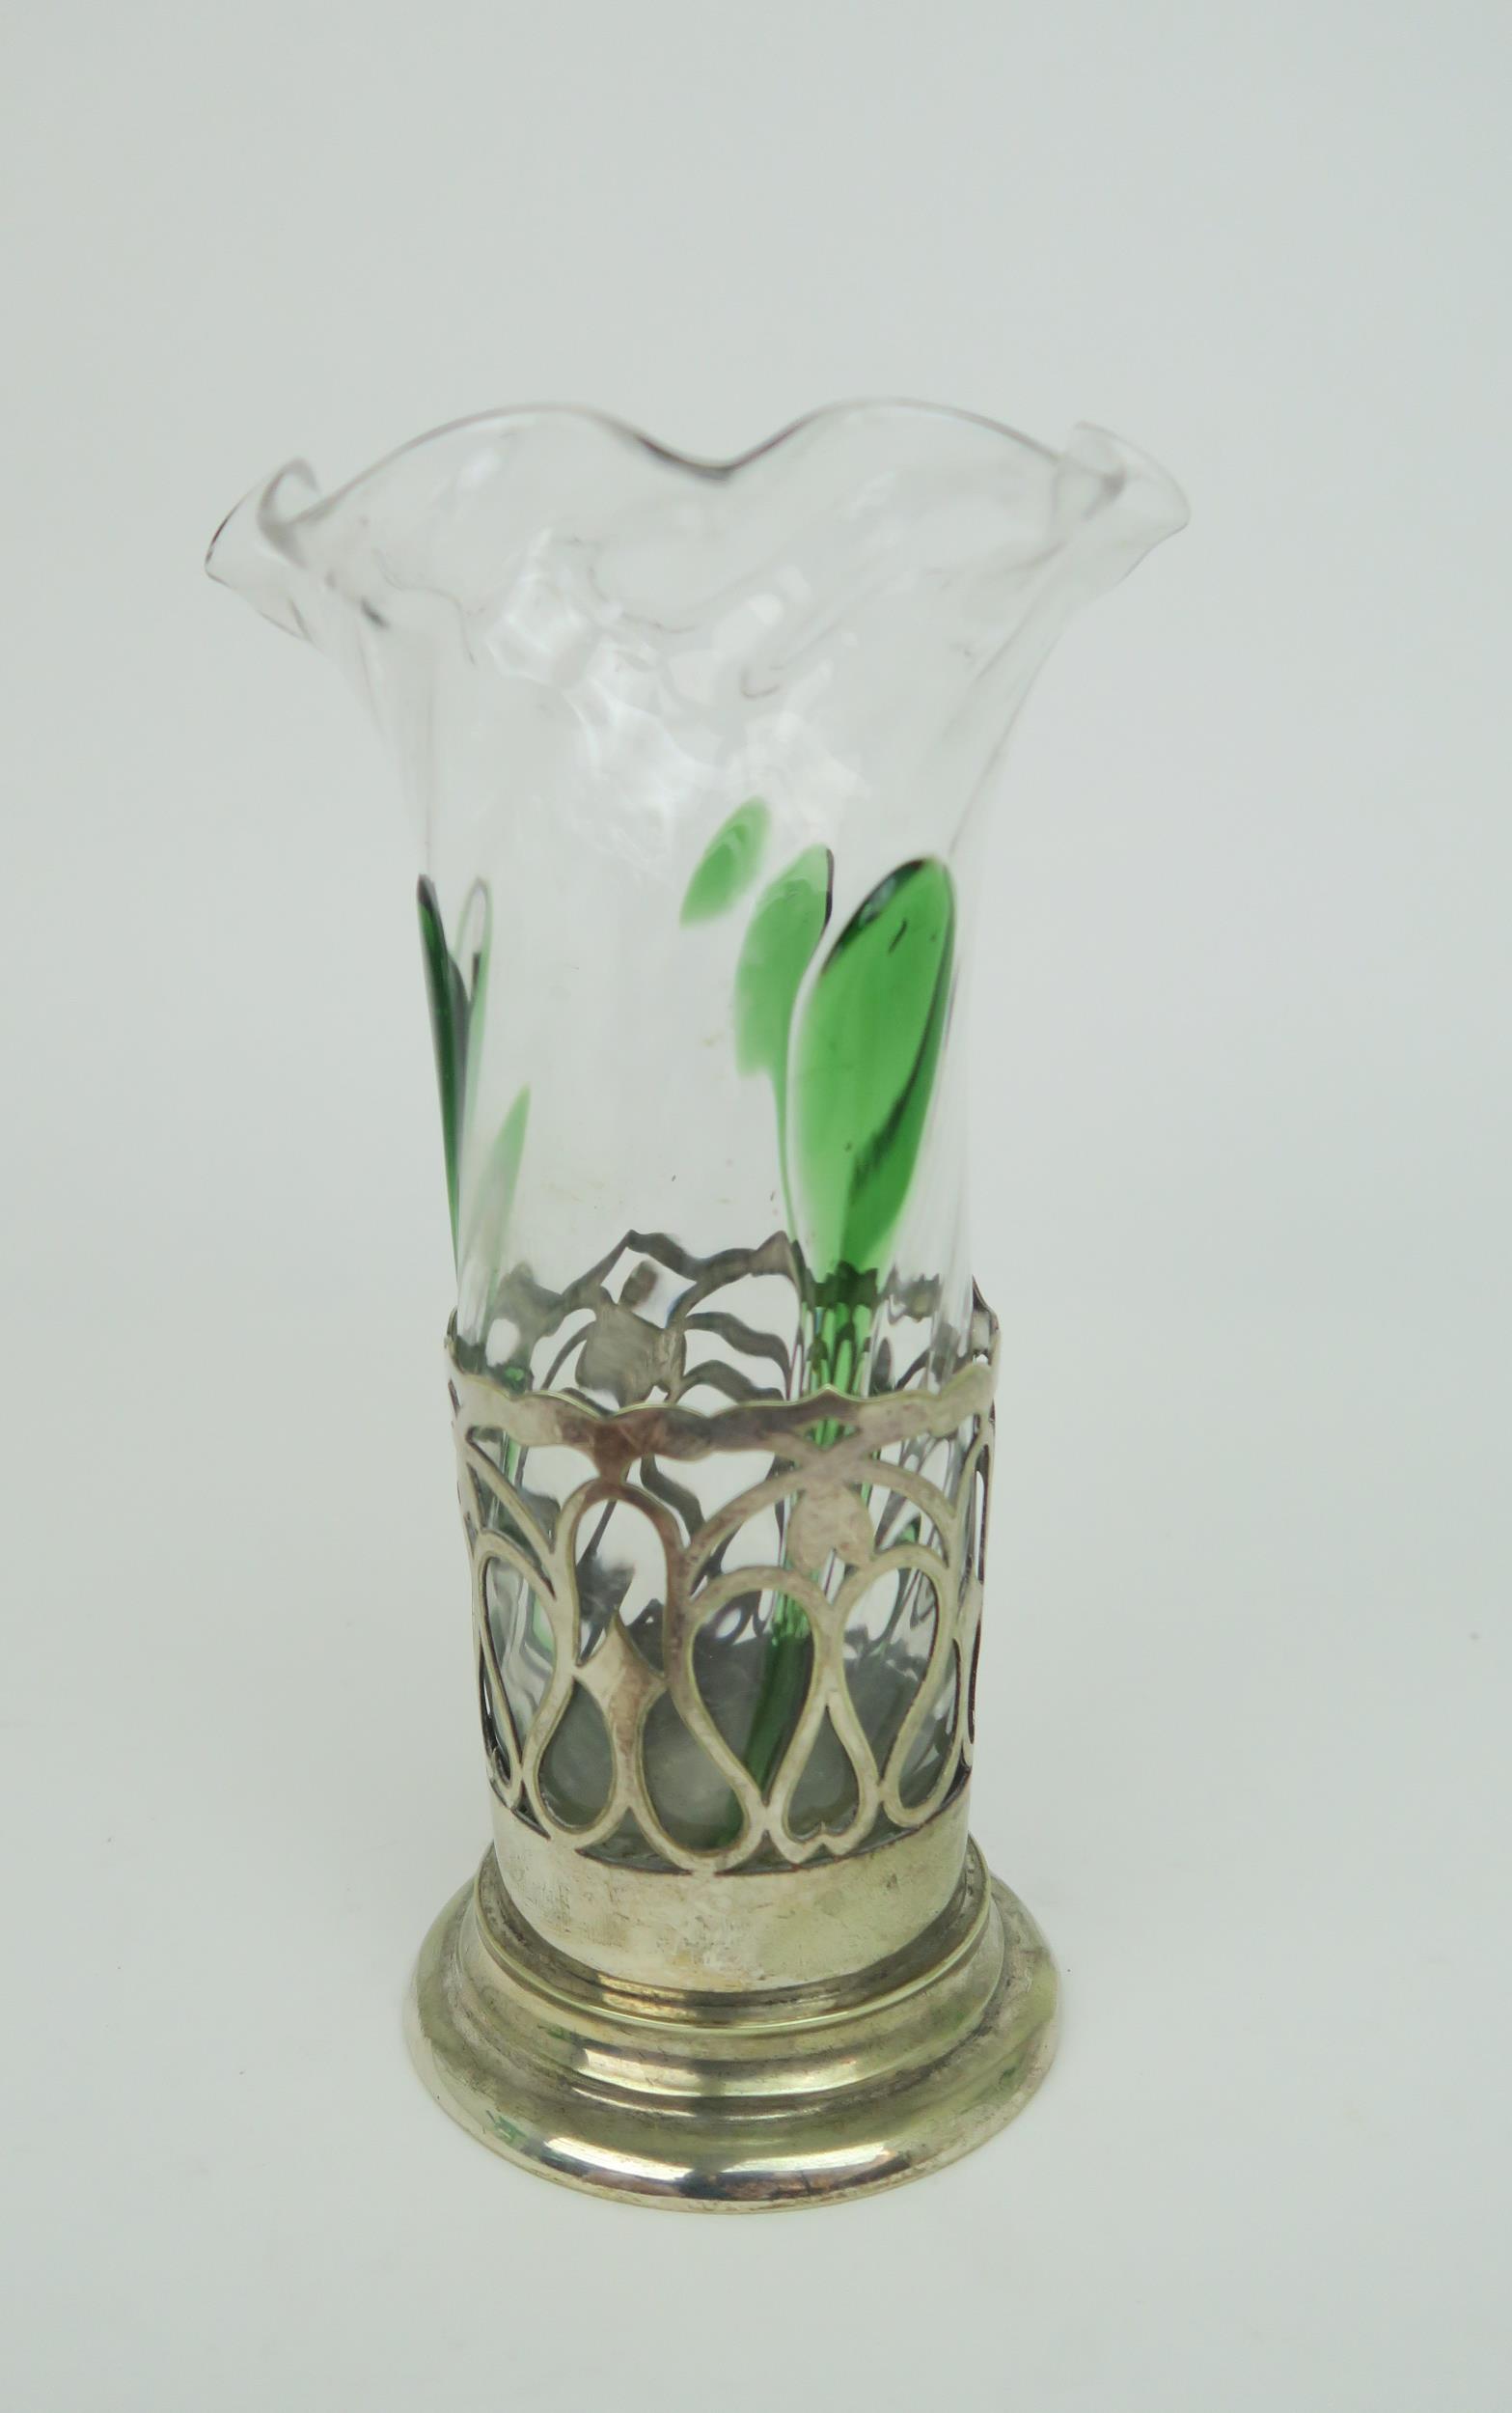 A GROUP OF FIVE STUART AND SONS STOURBRIDGE GLASS VASES all in clear glass with applied and trailing - Image 5 of 8